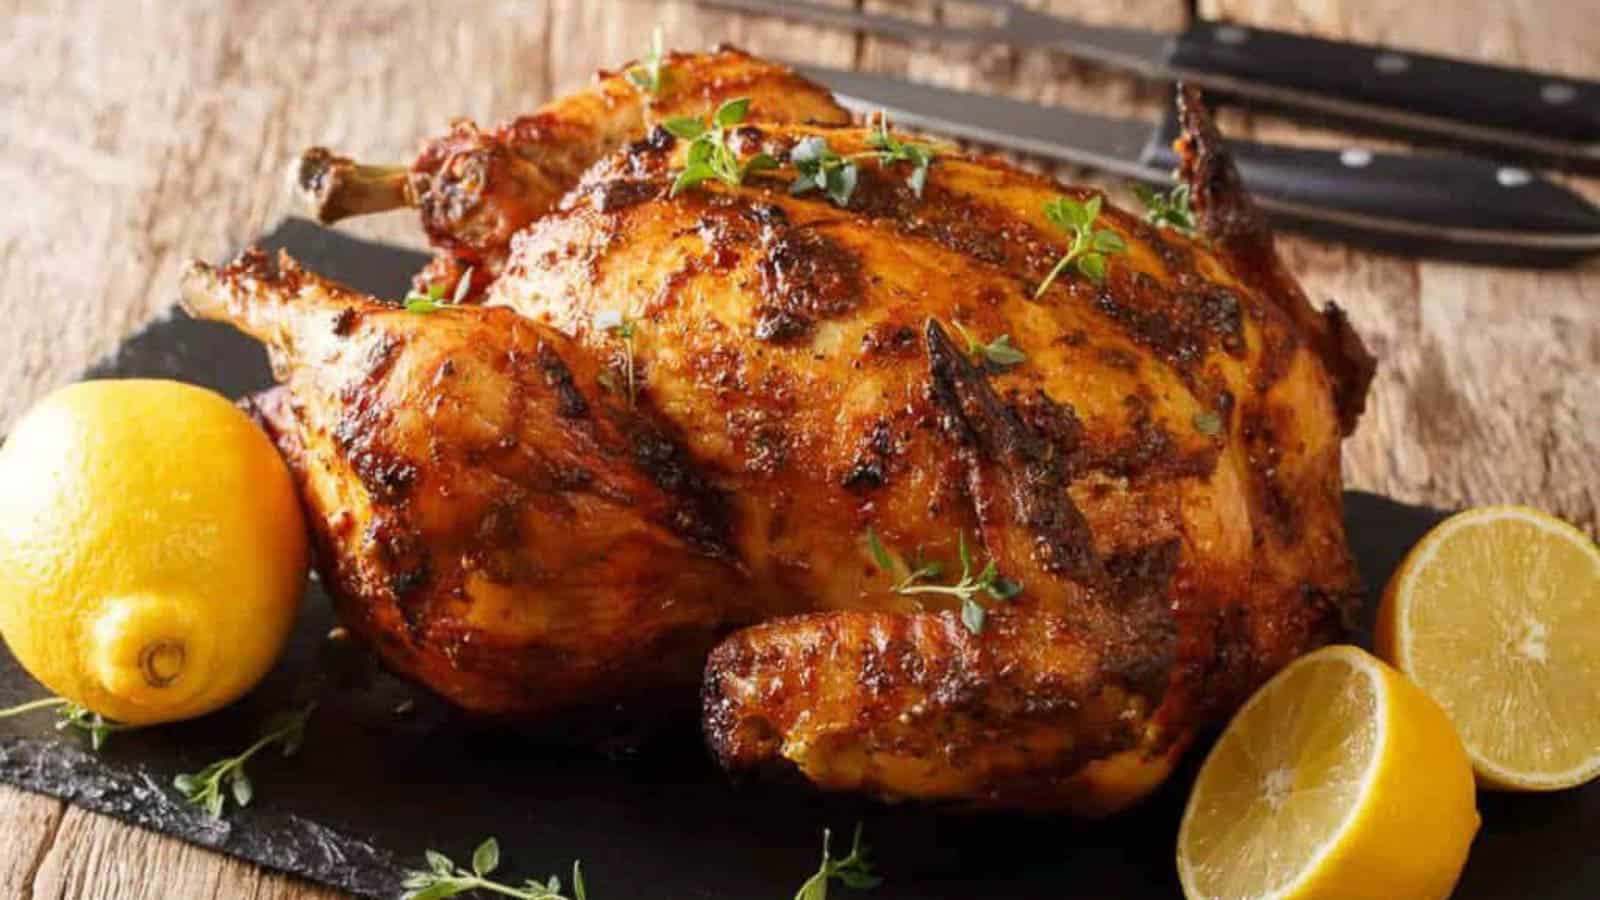 Whole chicken with lemons.